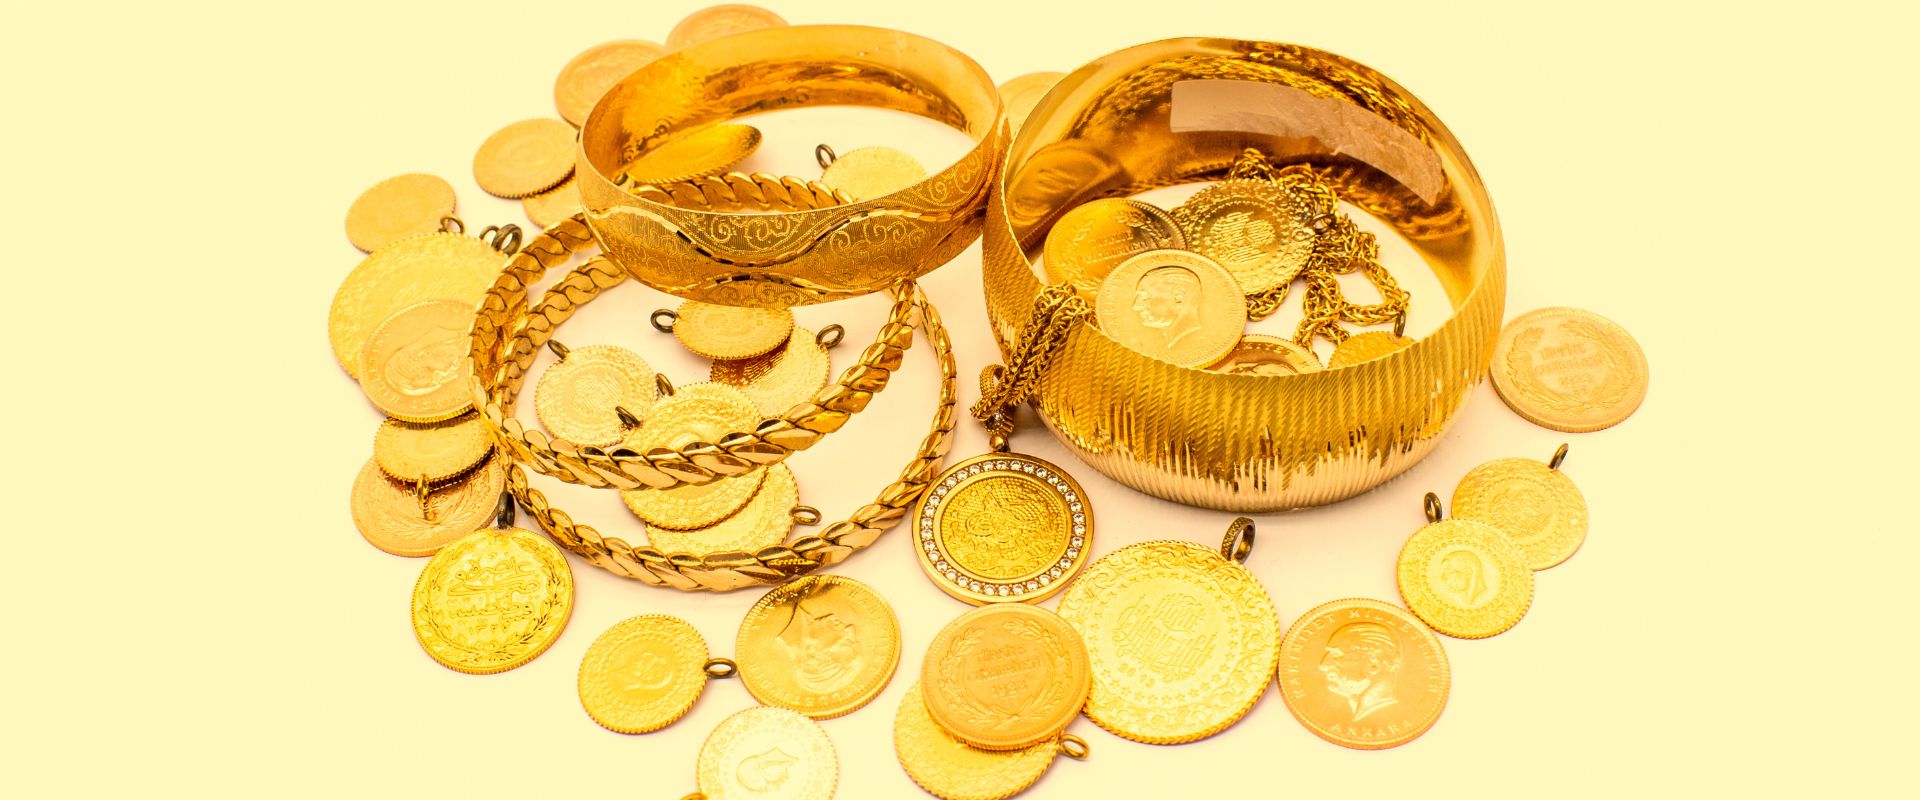 gold coins bracelet and necklace on yellow background